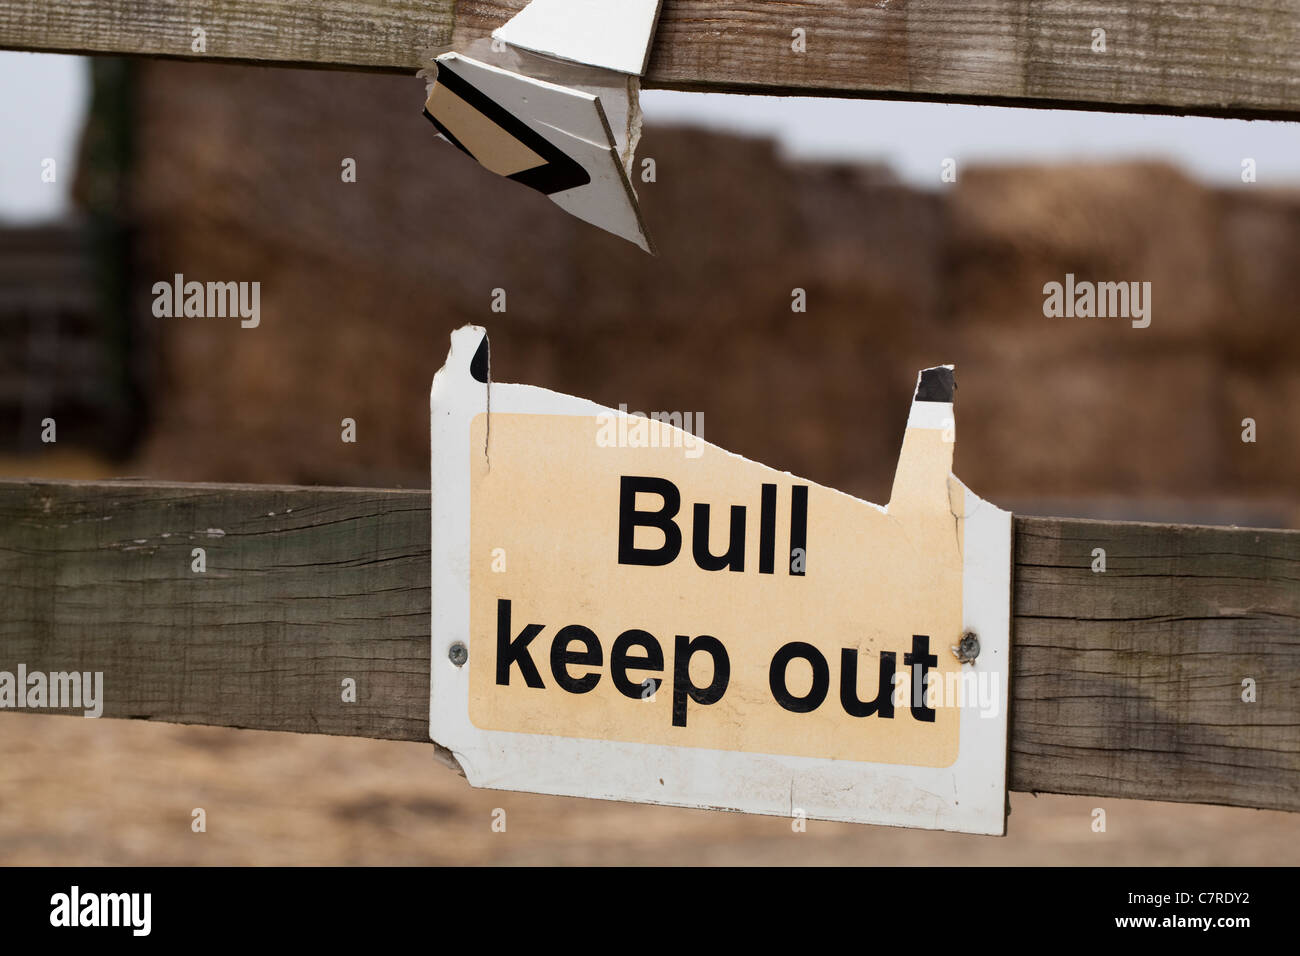 Sign, 'BULL KEEP OUT'. Field Fence, Suffolk, England. Warning notice to public, passers by. Stock Photo